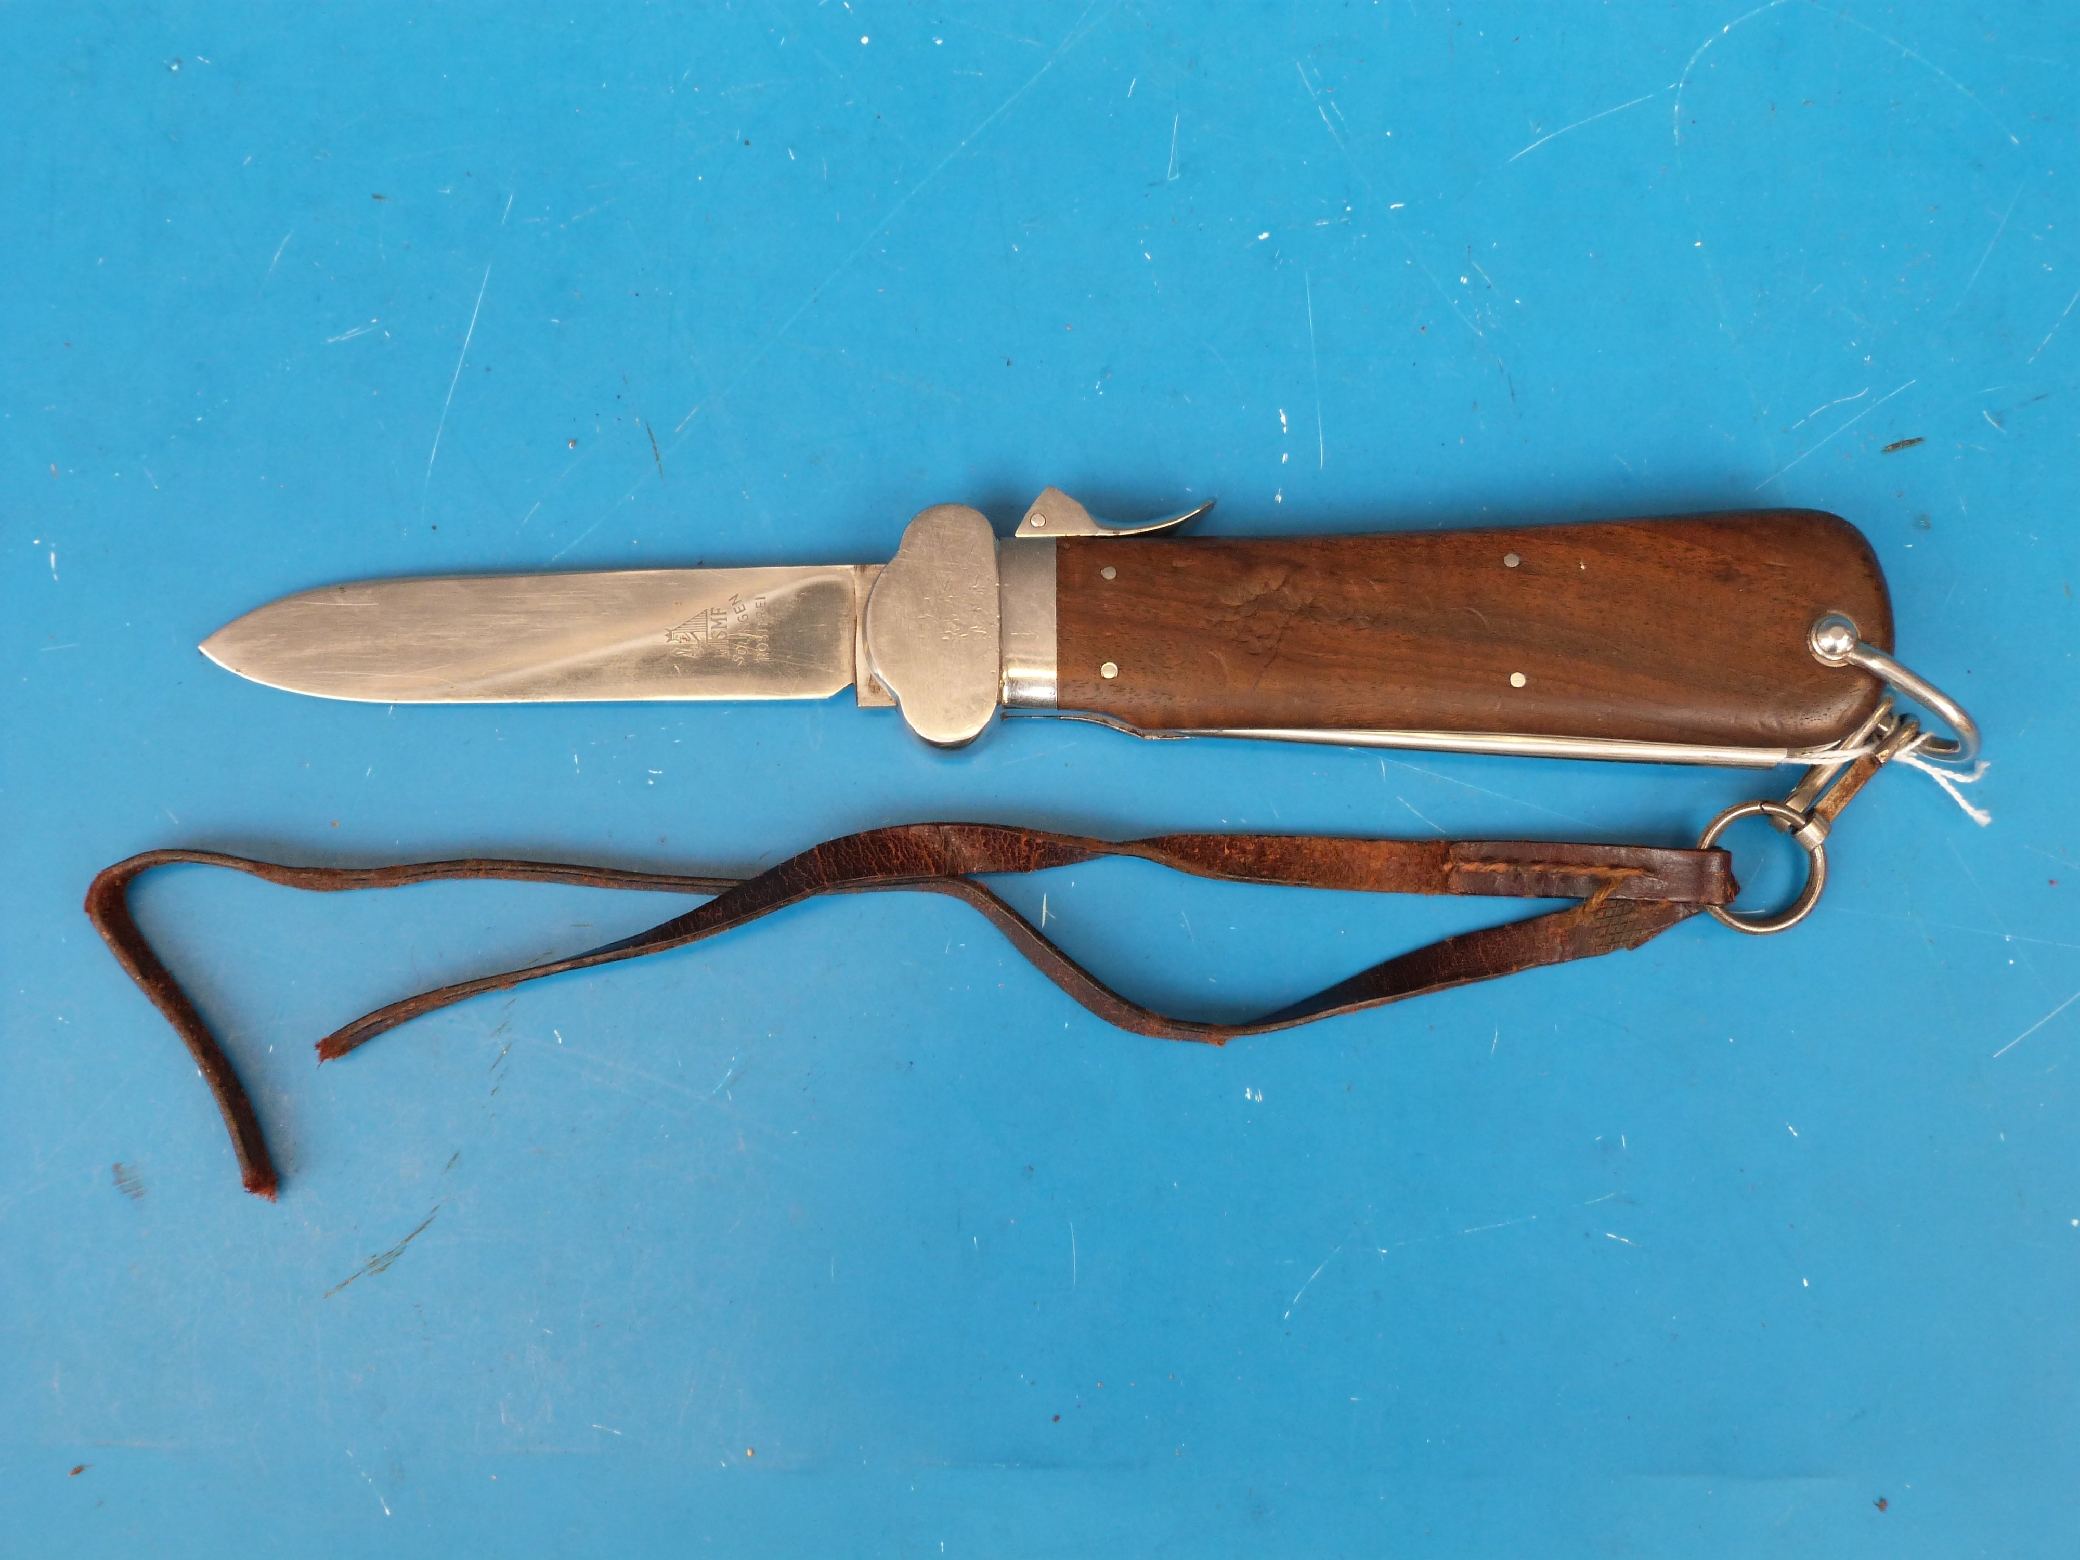 A German Paratroopers SMF Solingen Rostfrei gravity knife with wooden handle, marlin spike and